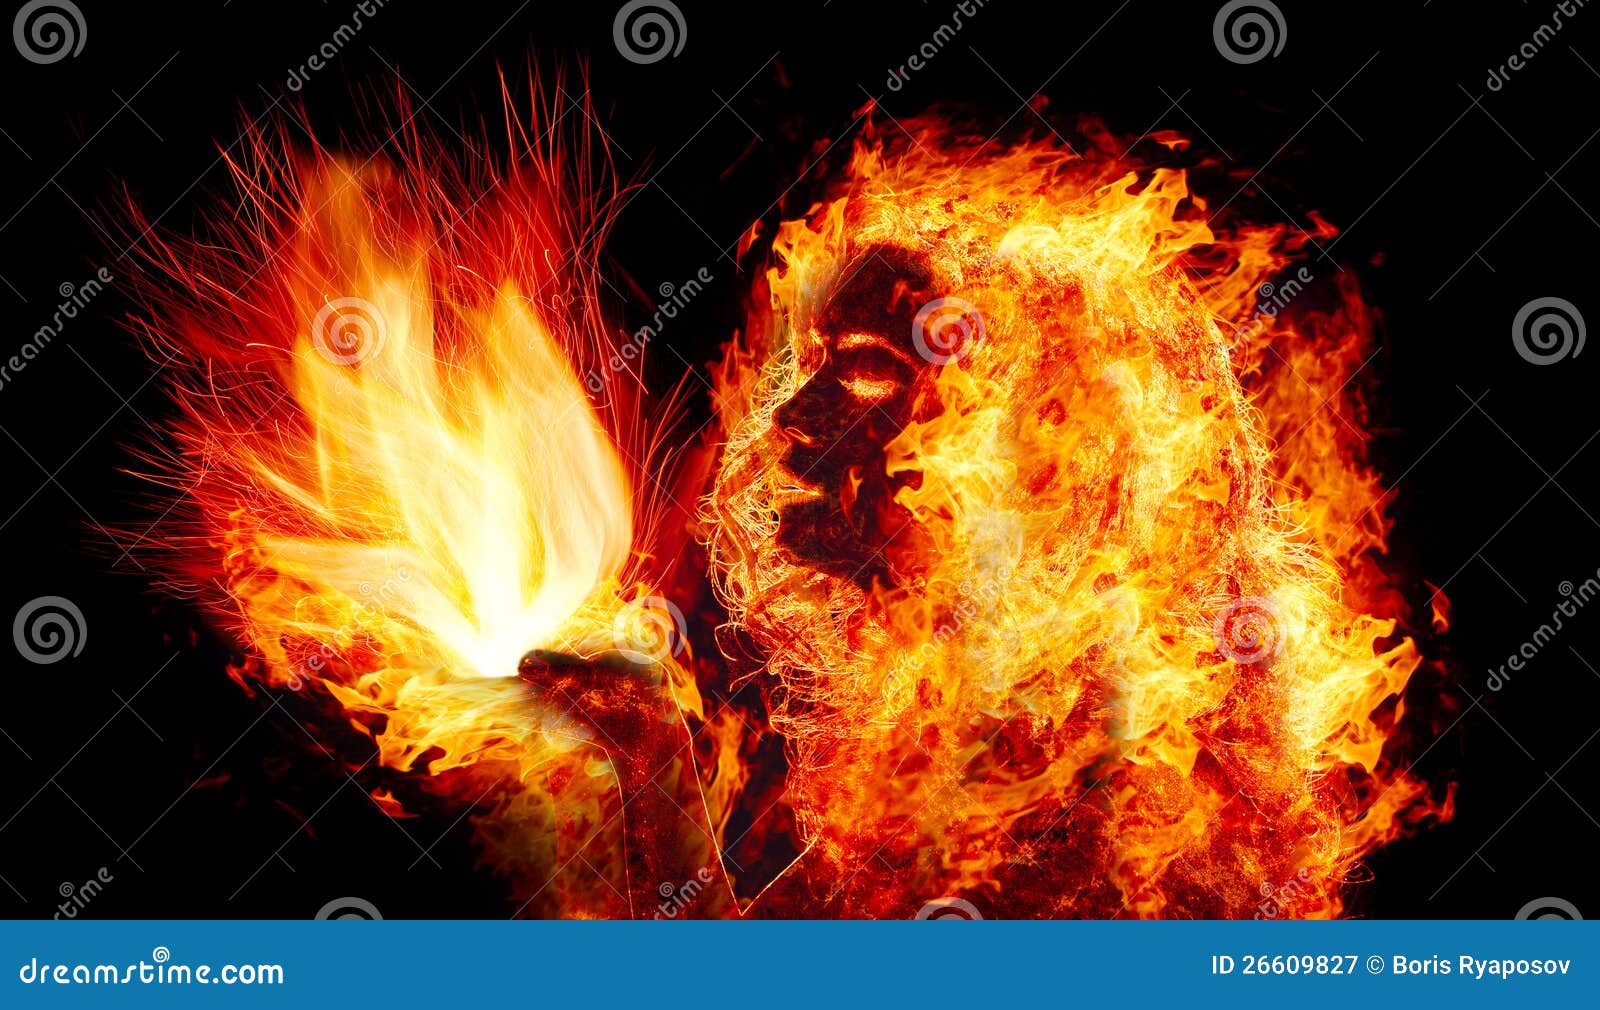 Girl Holds a Flame in Palms Stock Image - Image of light, dark: 26609827